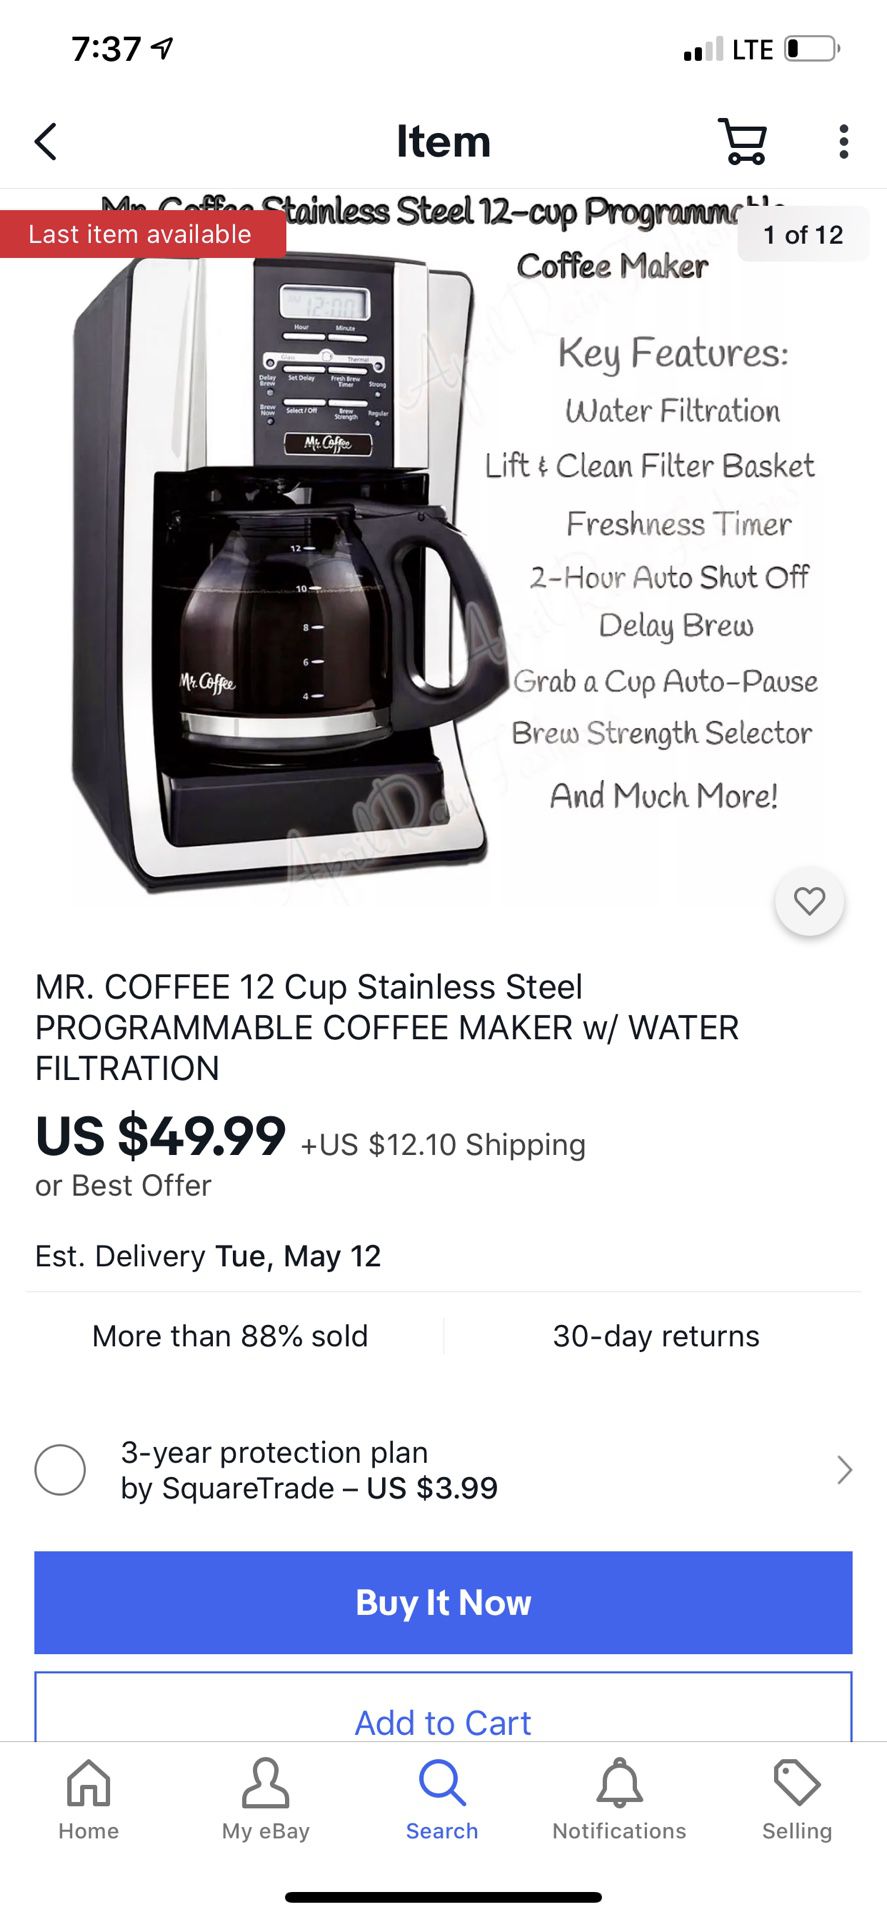 MR. COFFEE 12 Cup Stainless Steel PROGRAMMABLE COFFEE MAKER w/ WATER FILTRATION it’s new just open box